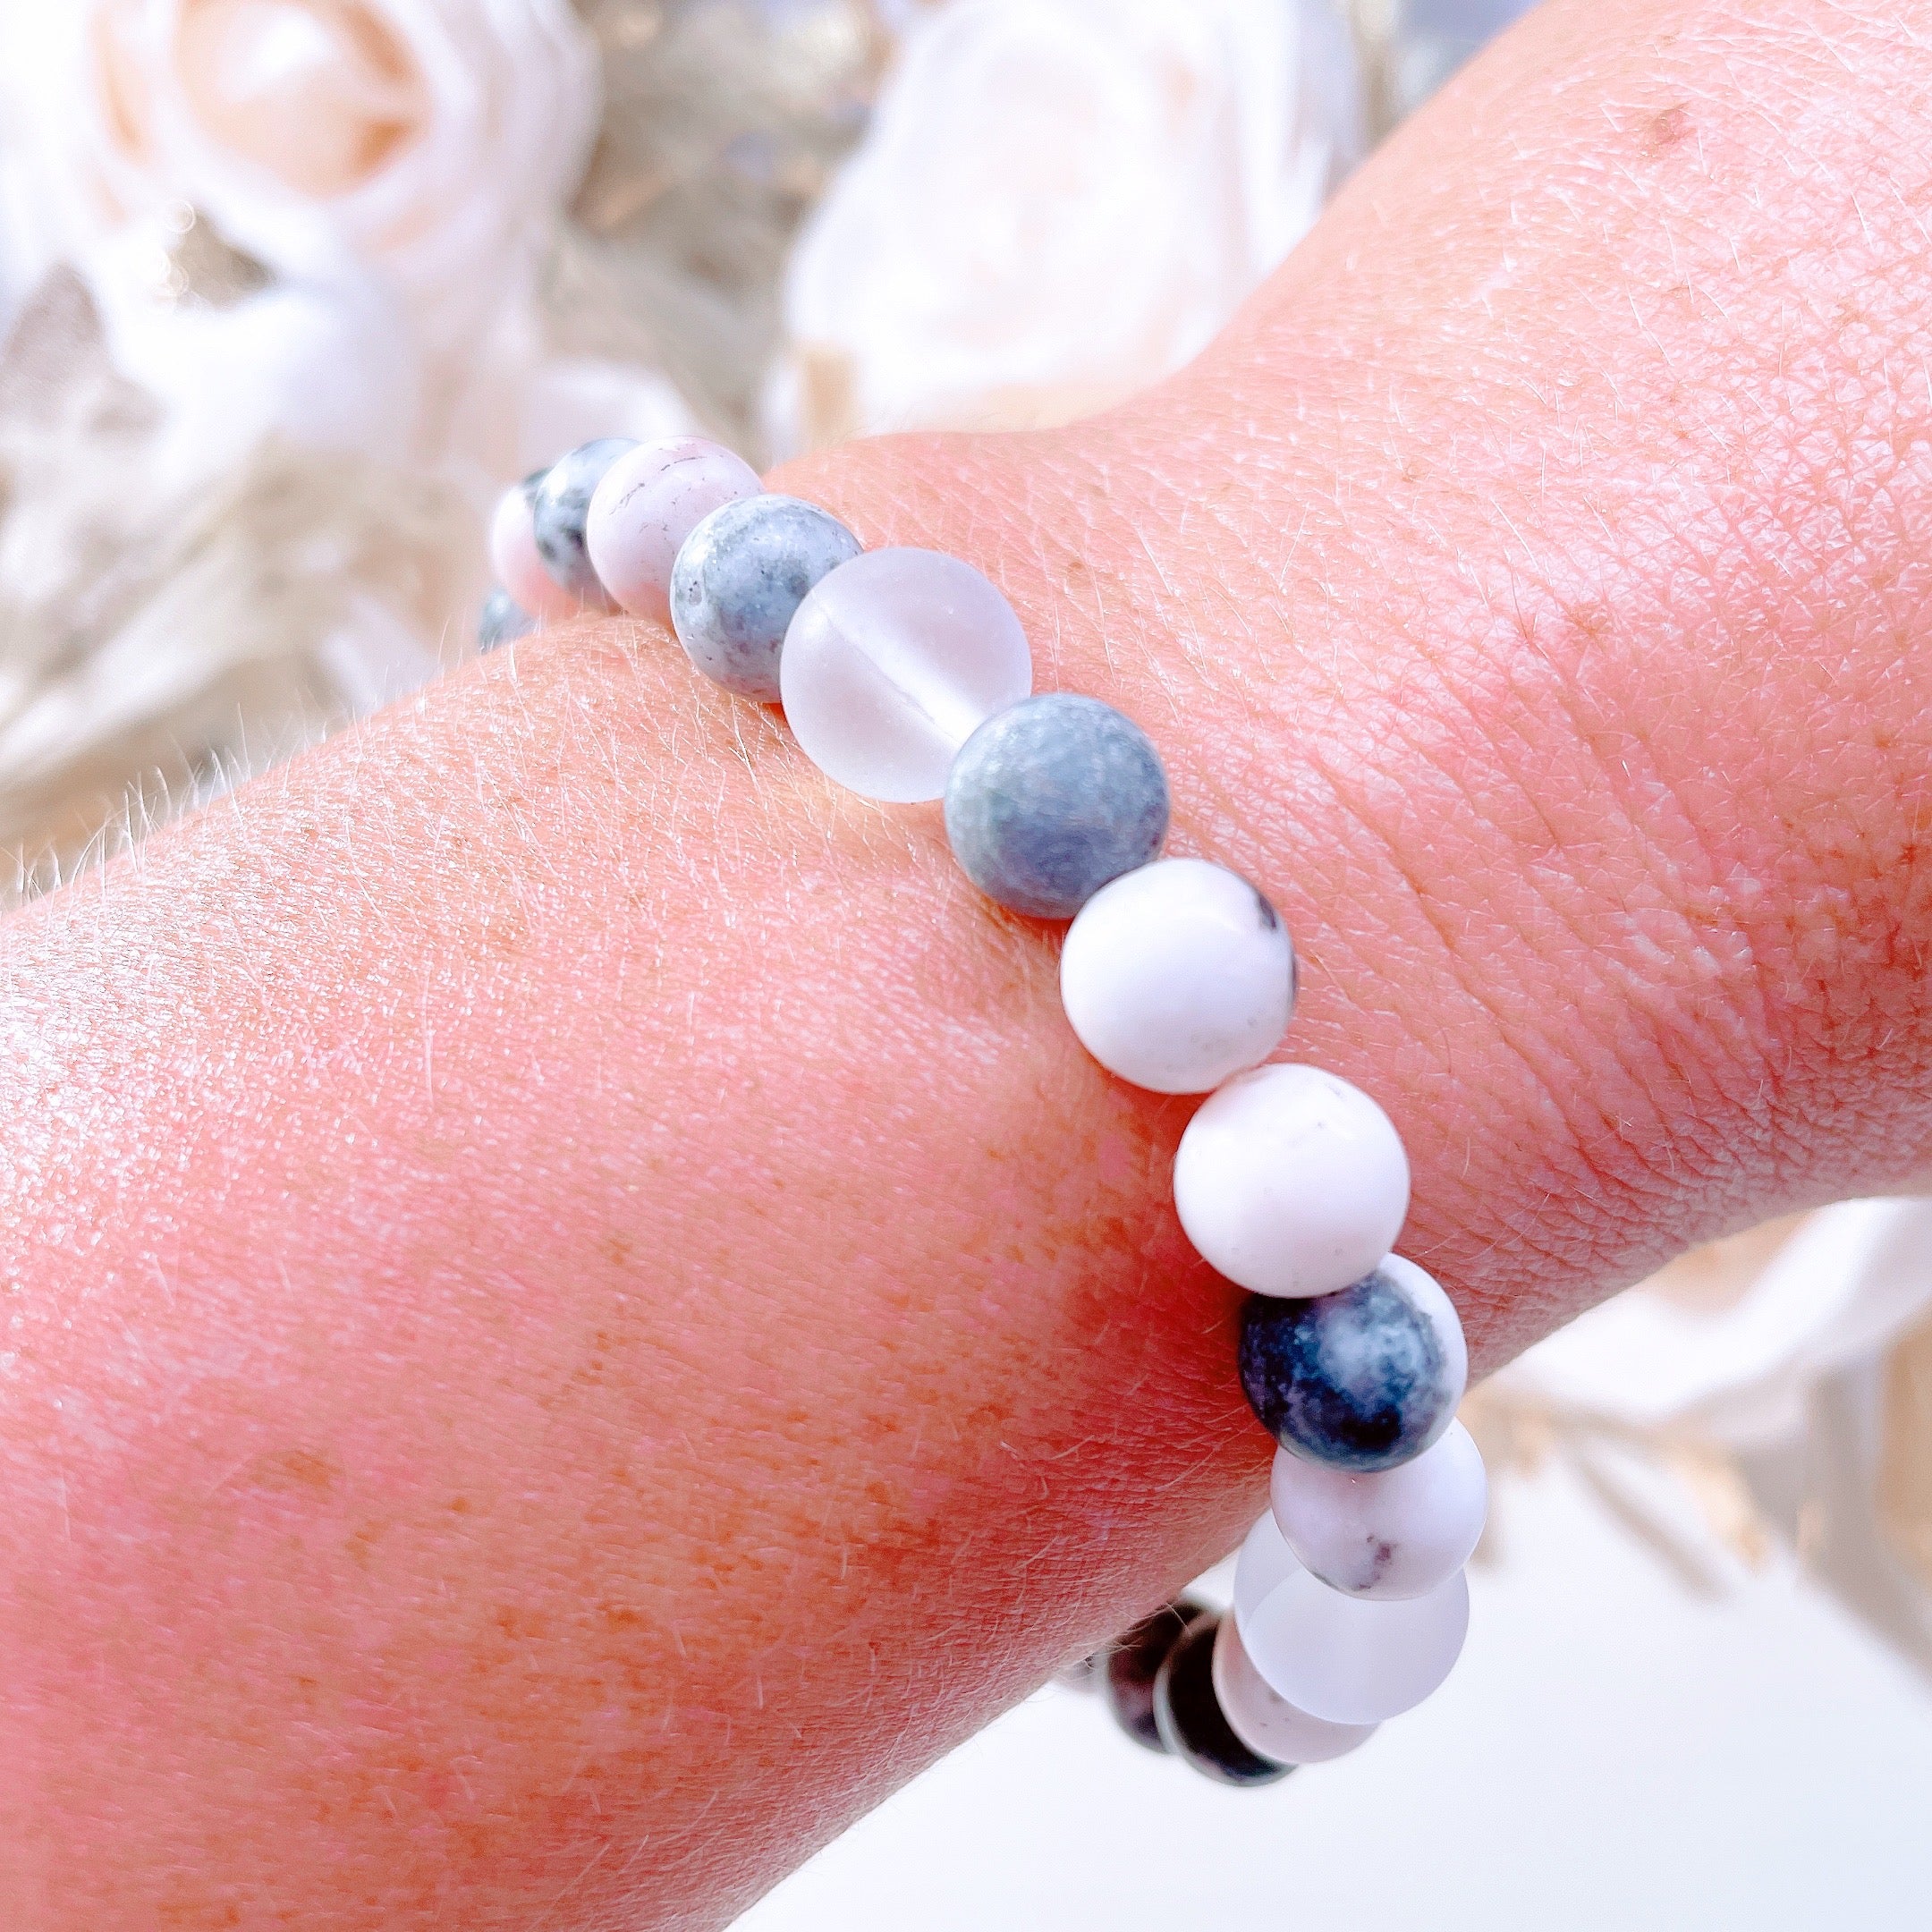 The original 5 Second Rule gemstone stretch bracelet made with pink zebra jasper beads and translucent aura beads is worn on a wrist. Natural neutral colors.